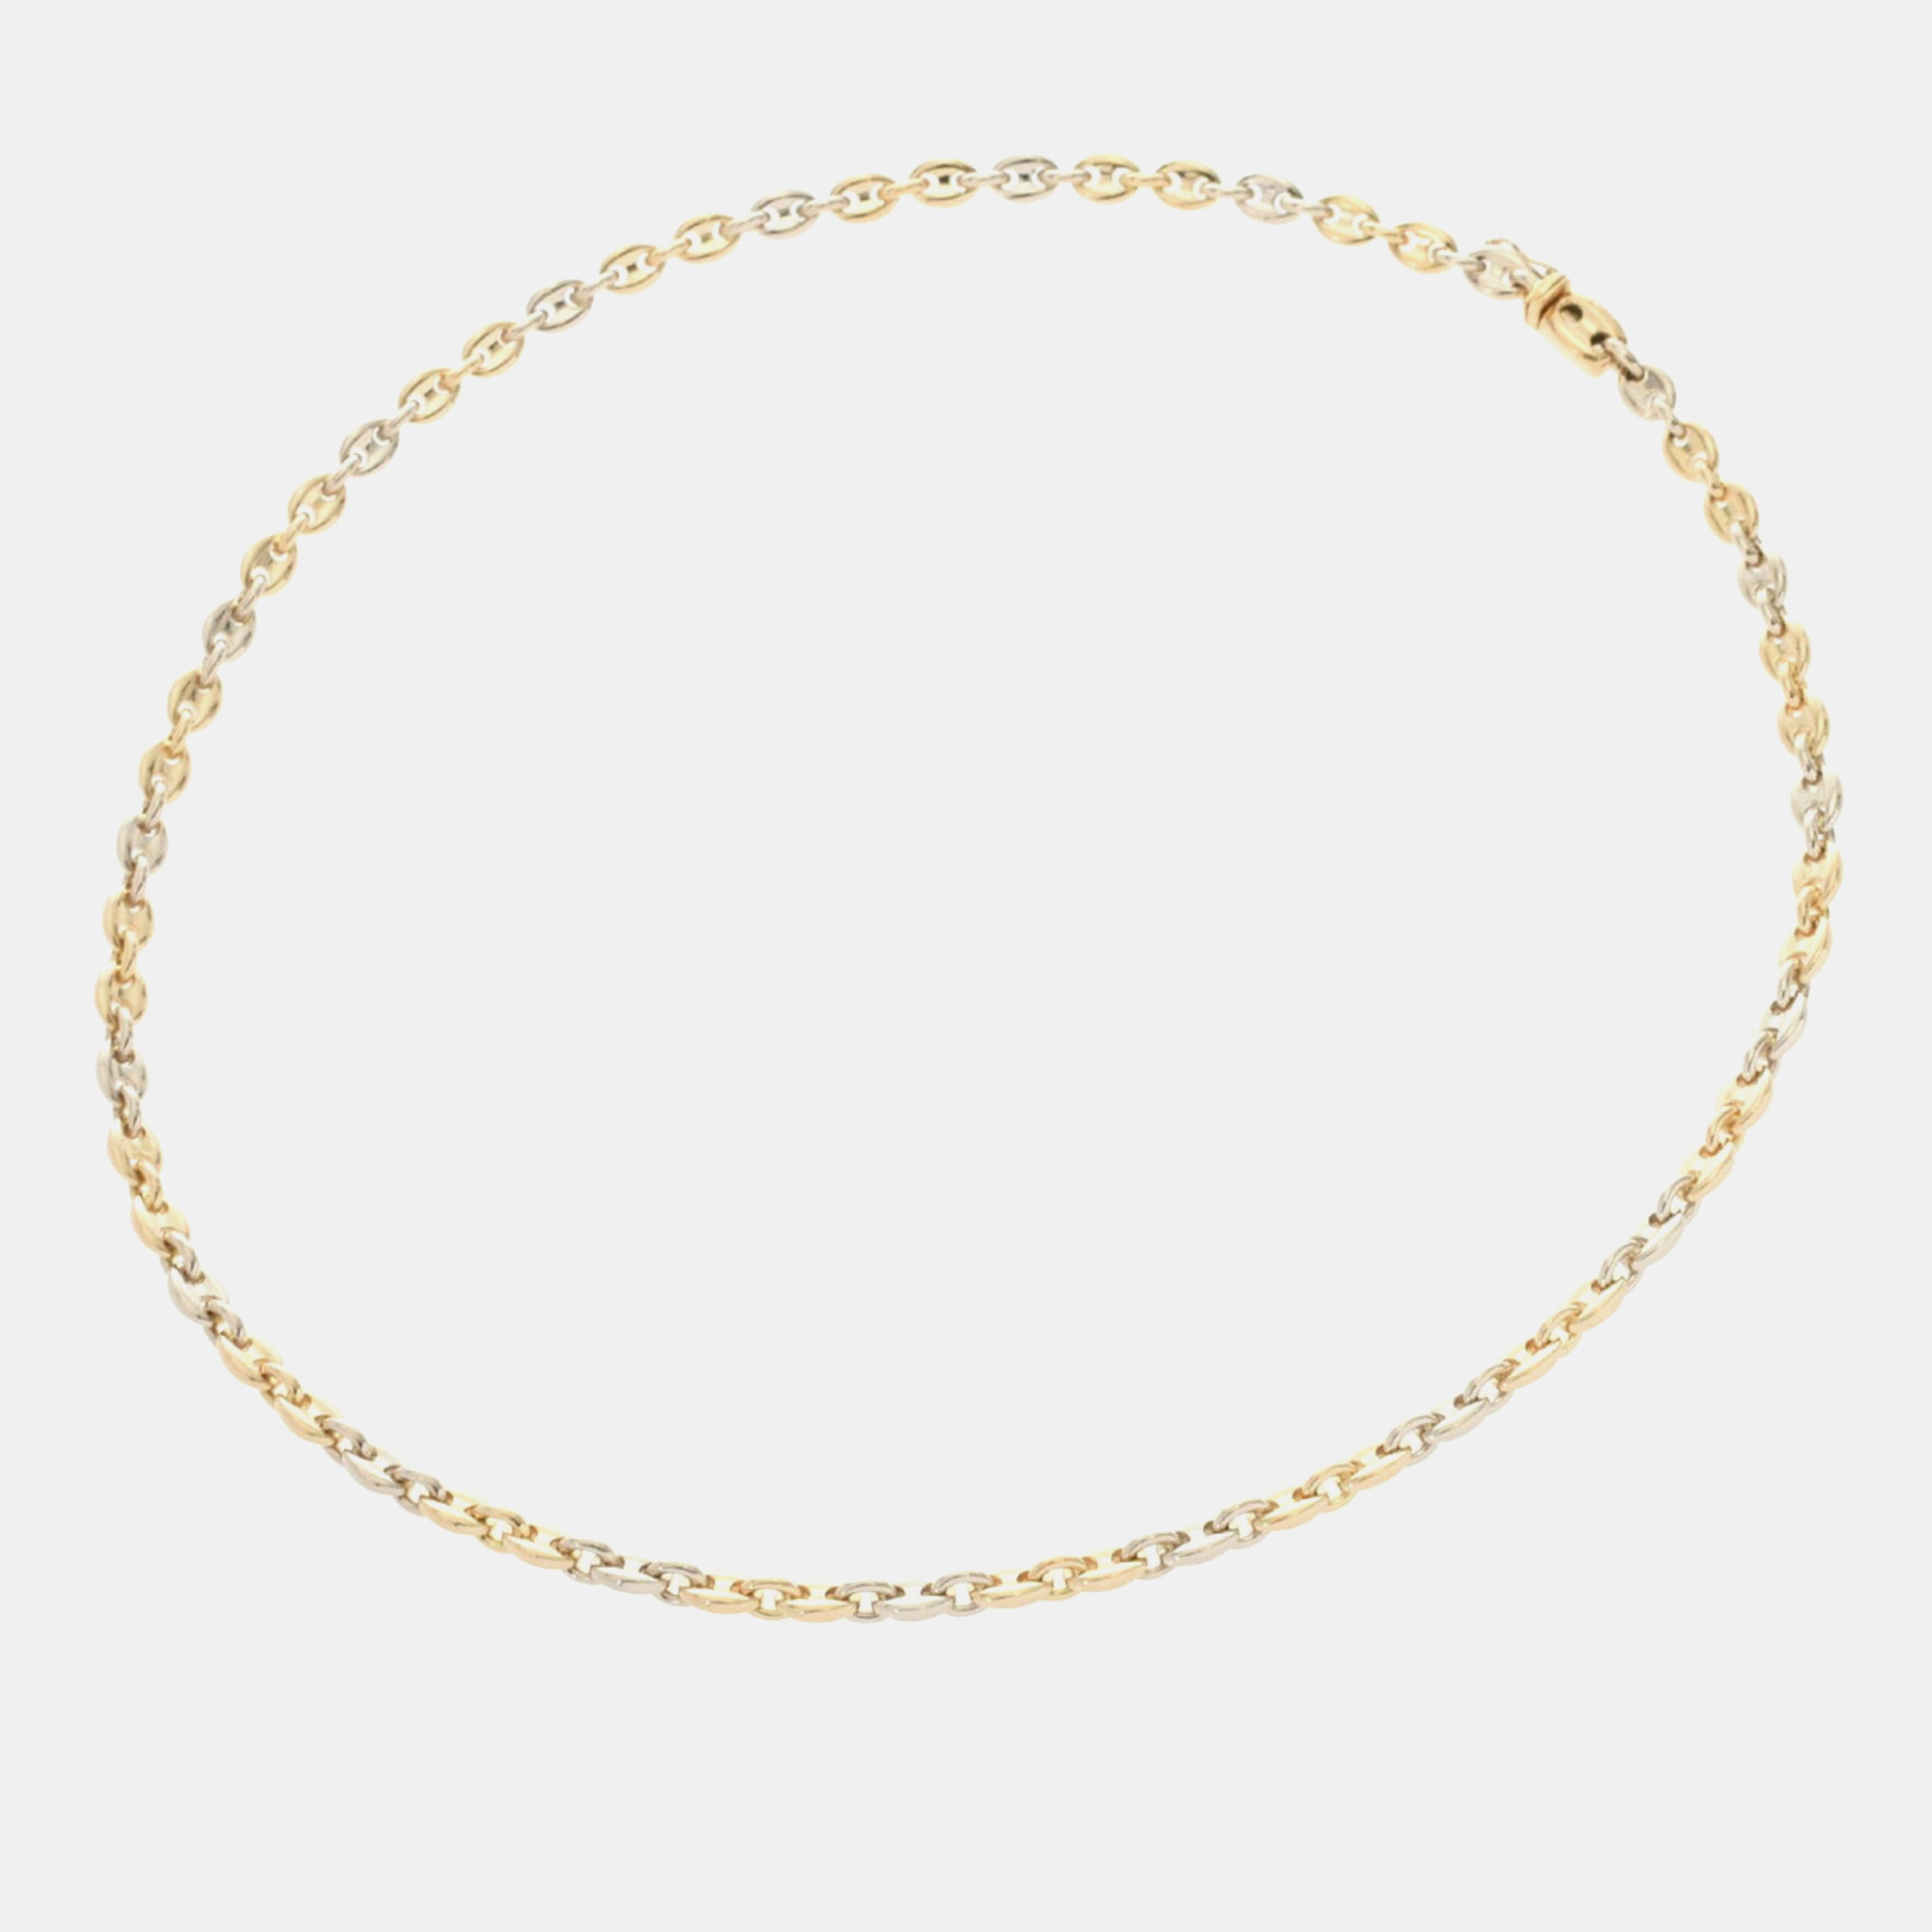 Cartier 18k white and yellow gold mariner link chain necklace